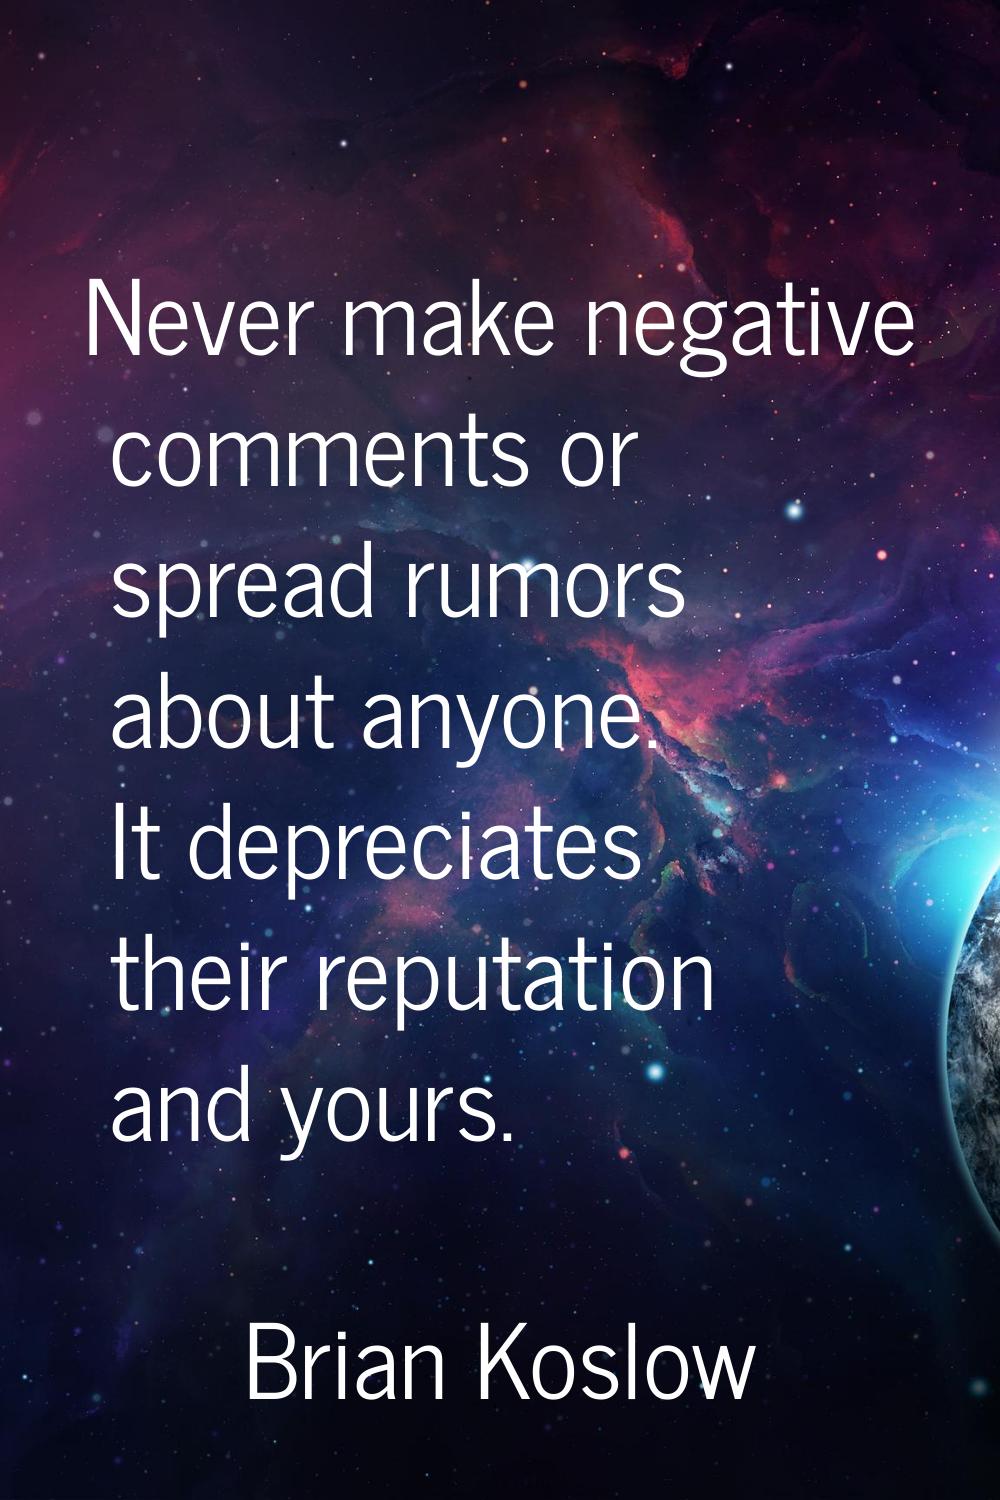 Never make negative comments or spread rumors about anyone. It depreciates their reputation and you